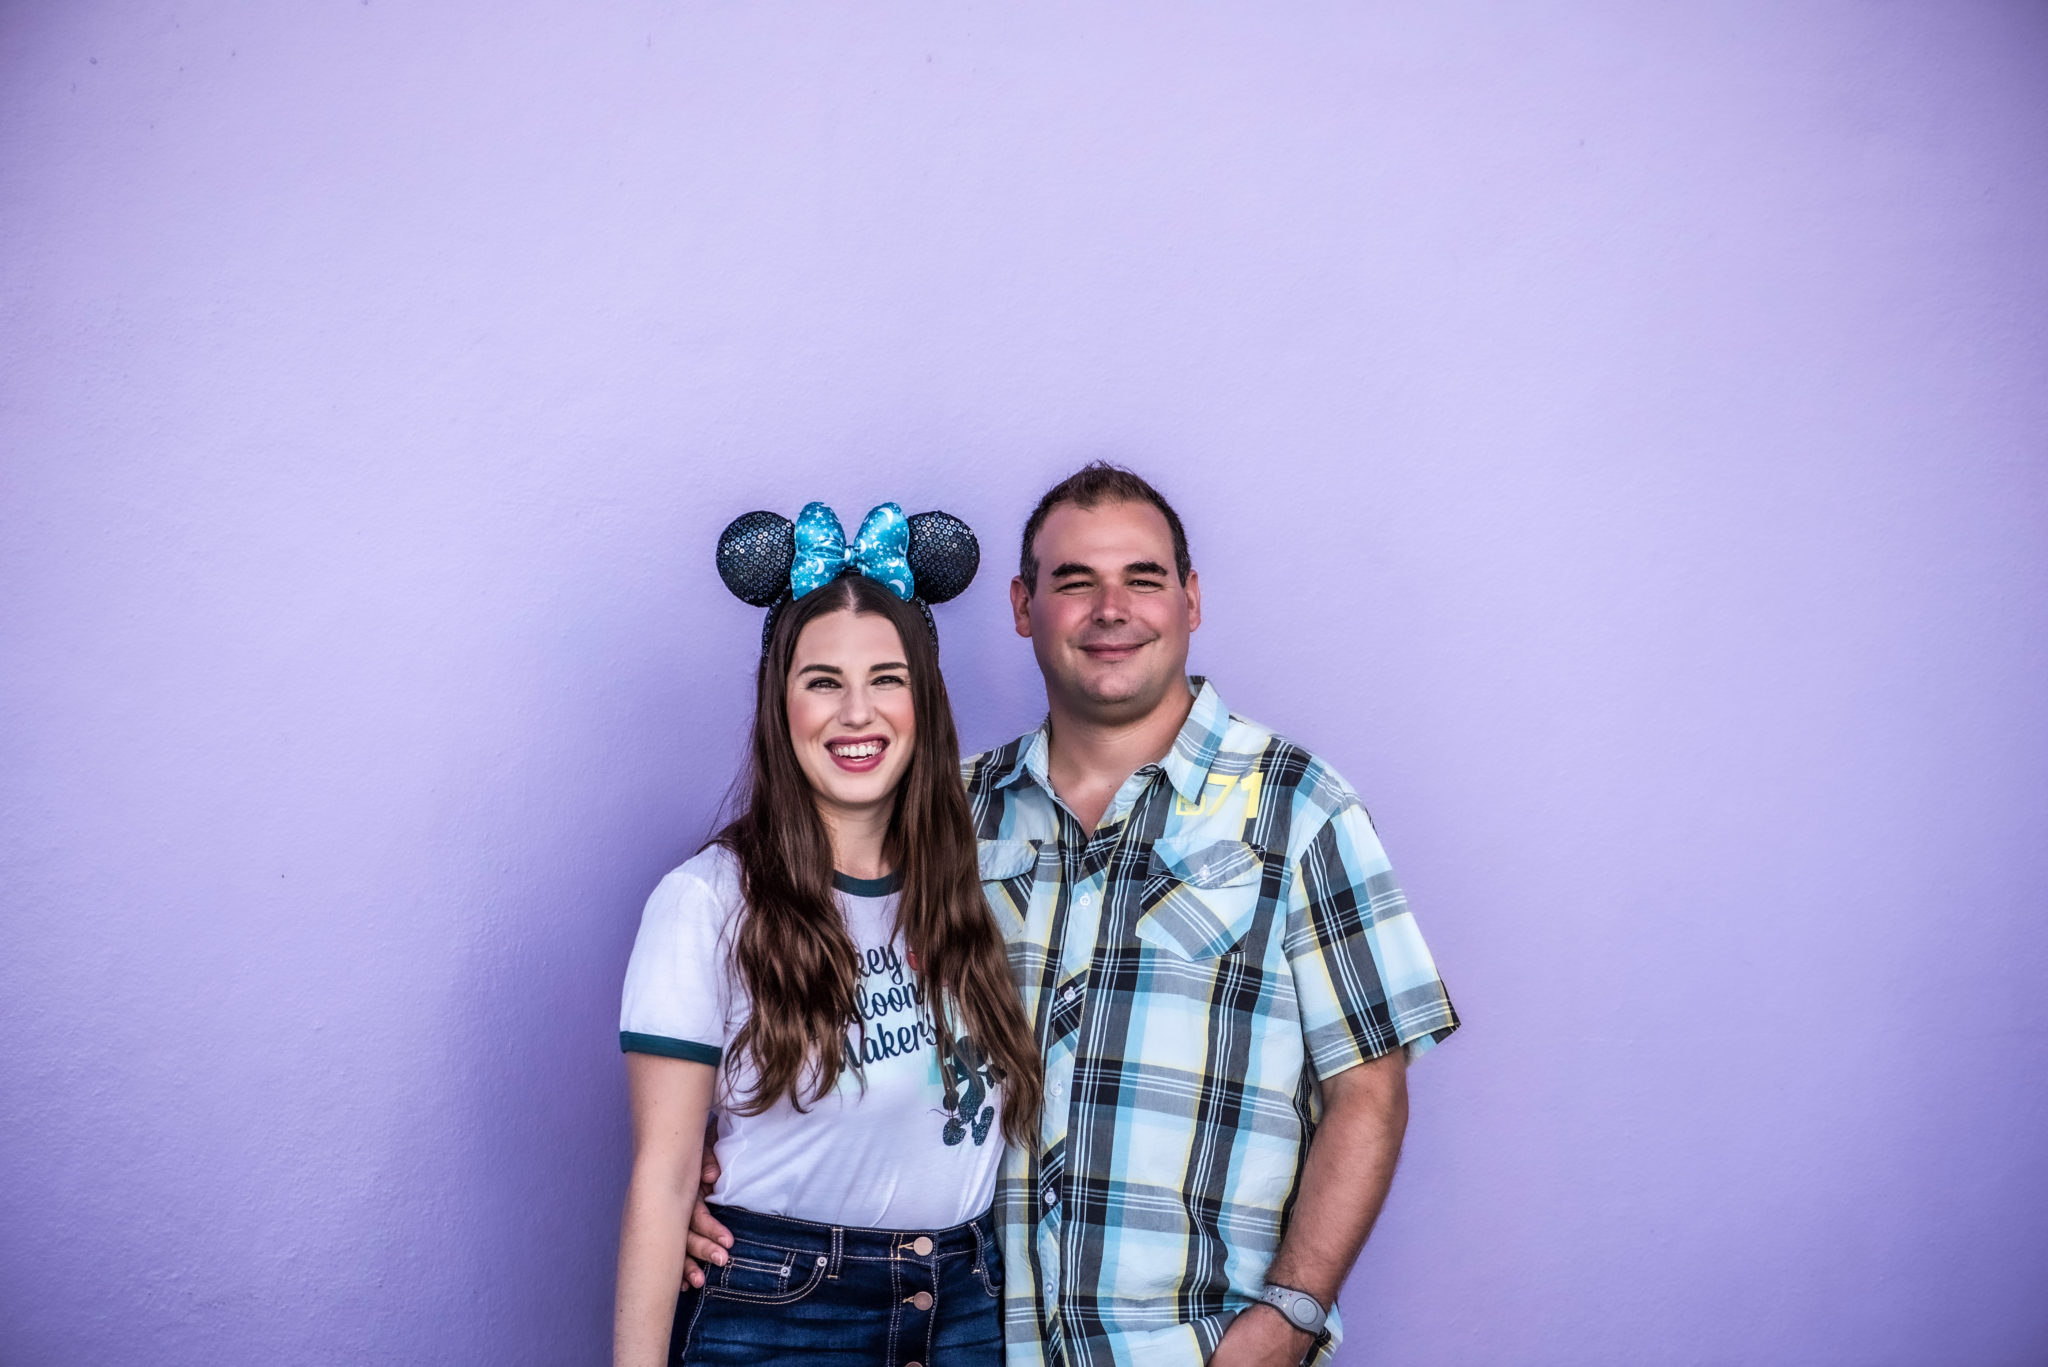 Chelsea and Jay in front of the original Purple Walls